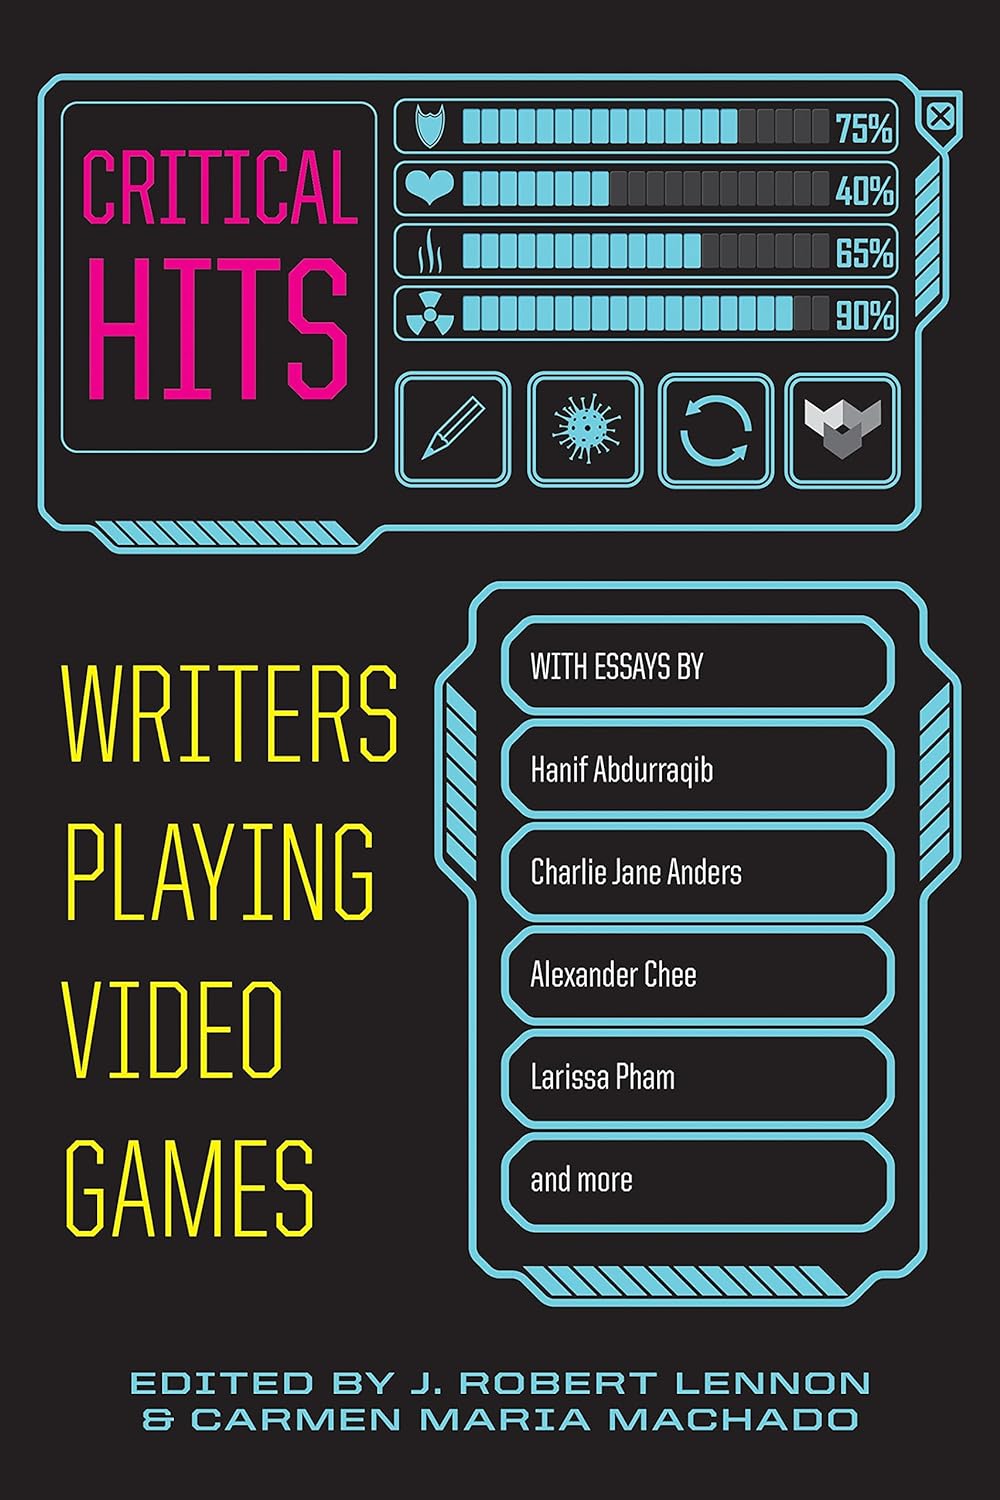 a graphic of the cover of Critical Hits: Writers Playing Video Games by Carmen Maria Machado and J. Robert Lennon